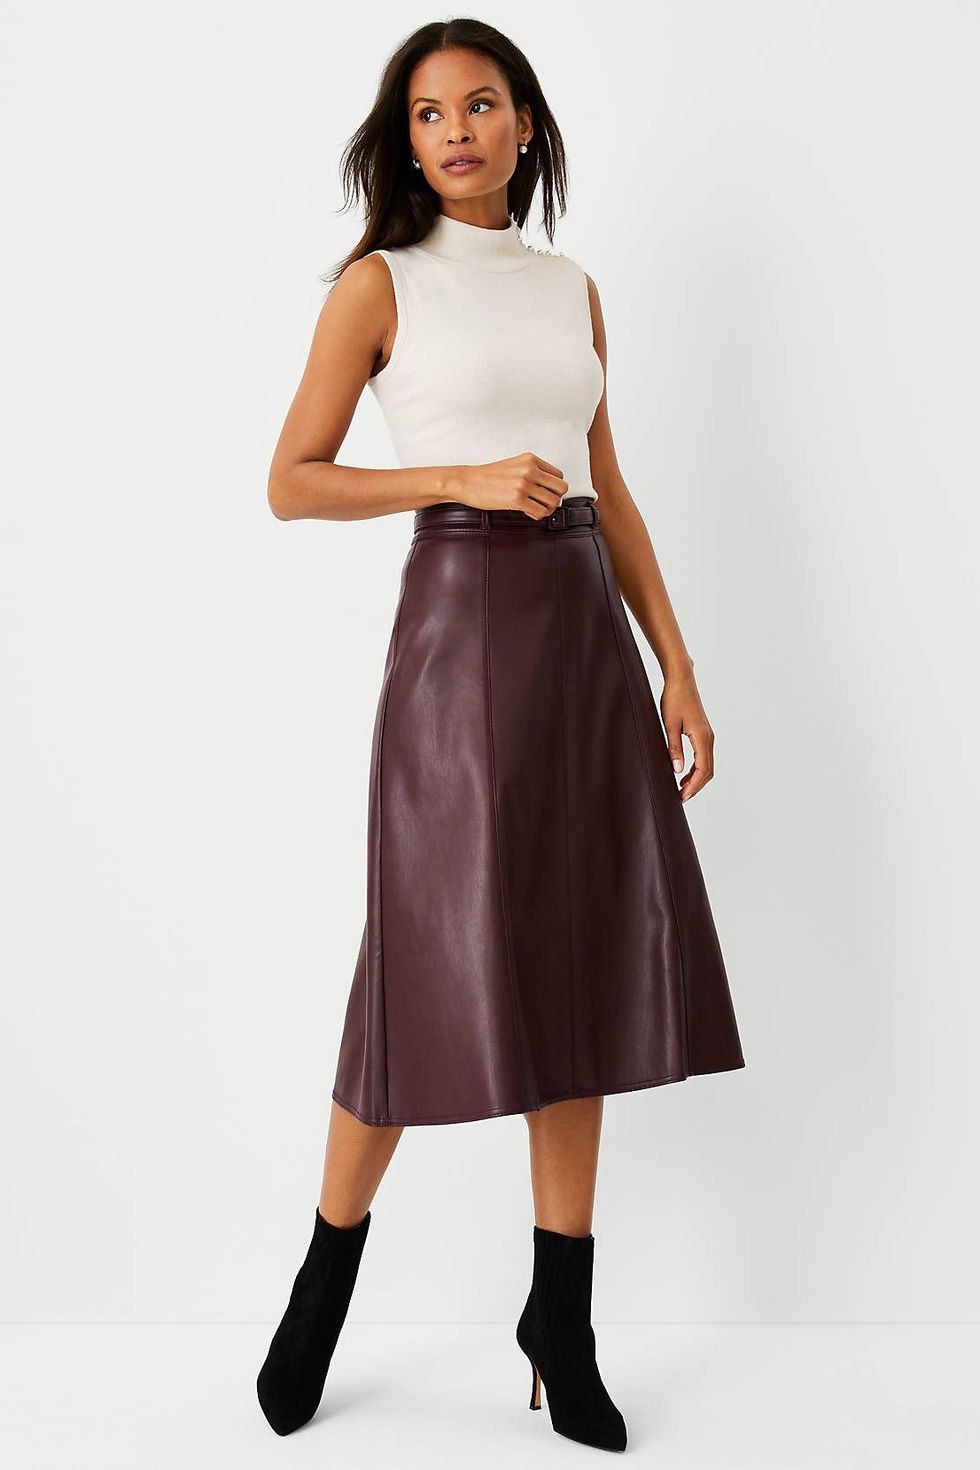 Ann Taylor Belted Faux Leather Midi Skirt